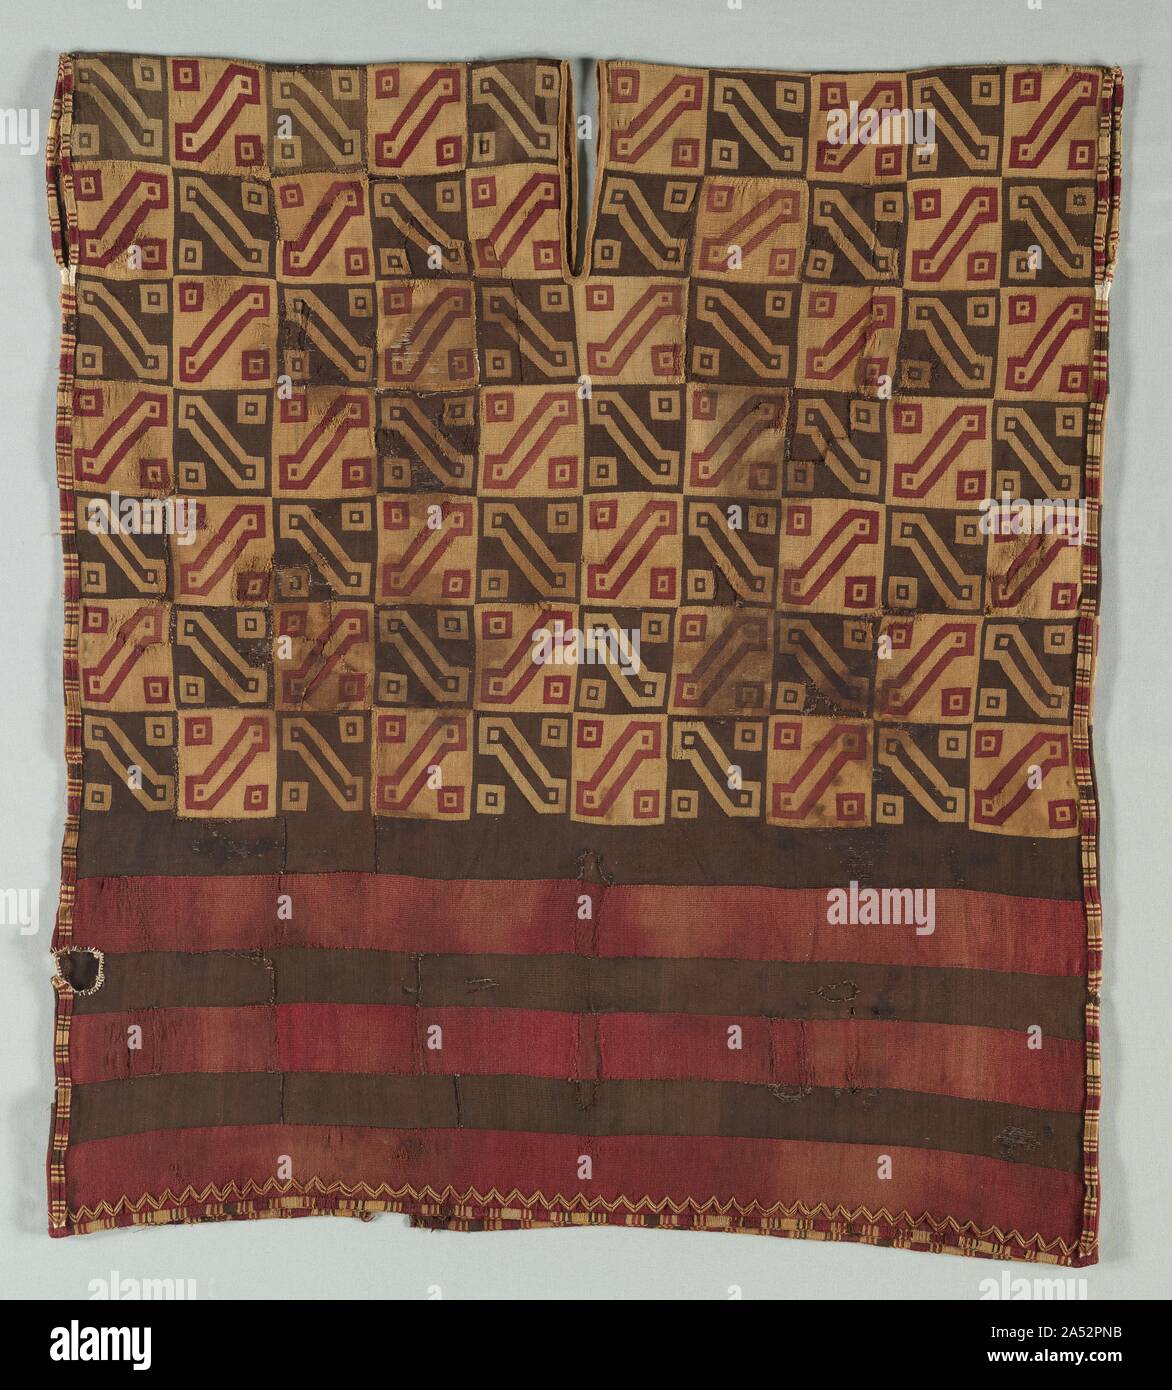 Tunic, c. 1400-1540. Finely woven interlocked tapestry garments were a privilege of the nobility within the Inca Empire. Such garments were made throughout the vast Inca territory by women of noble families, by professional weavers, and by the Aclla (Chosen Women). These specialists lived in cloistered communities and served the state by brewing beer and weaving fine cloth. The products of their labor were redistributed by the Inca state as prized gifts to loyal vassals and allies. The standardized decorative scheme of this tunic, known as the Inca Key, is one of the most common Inca tunic pat Stock Photo